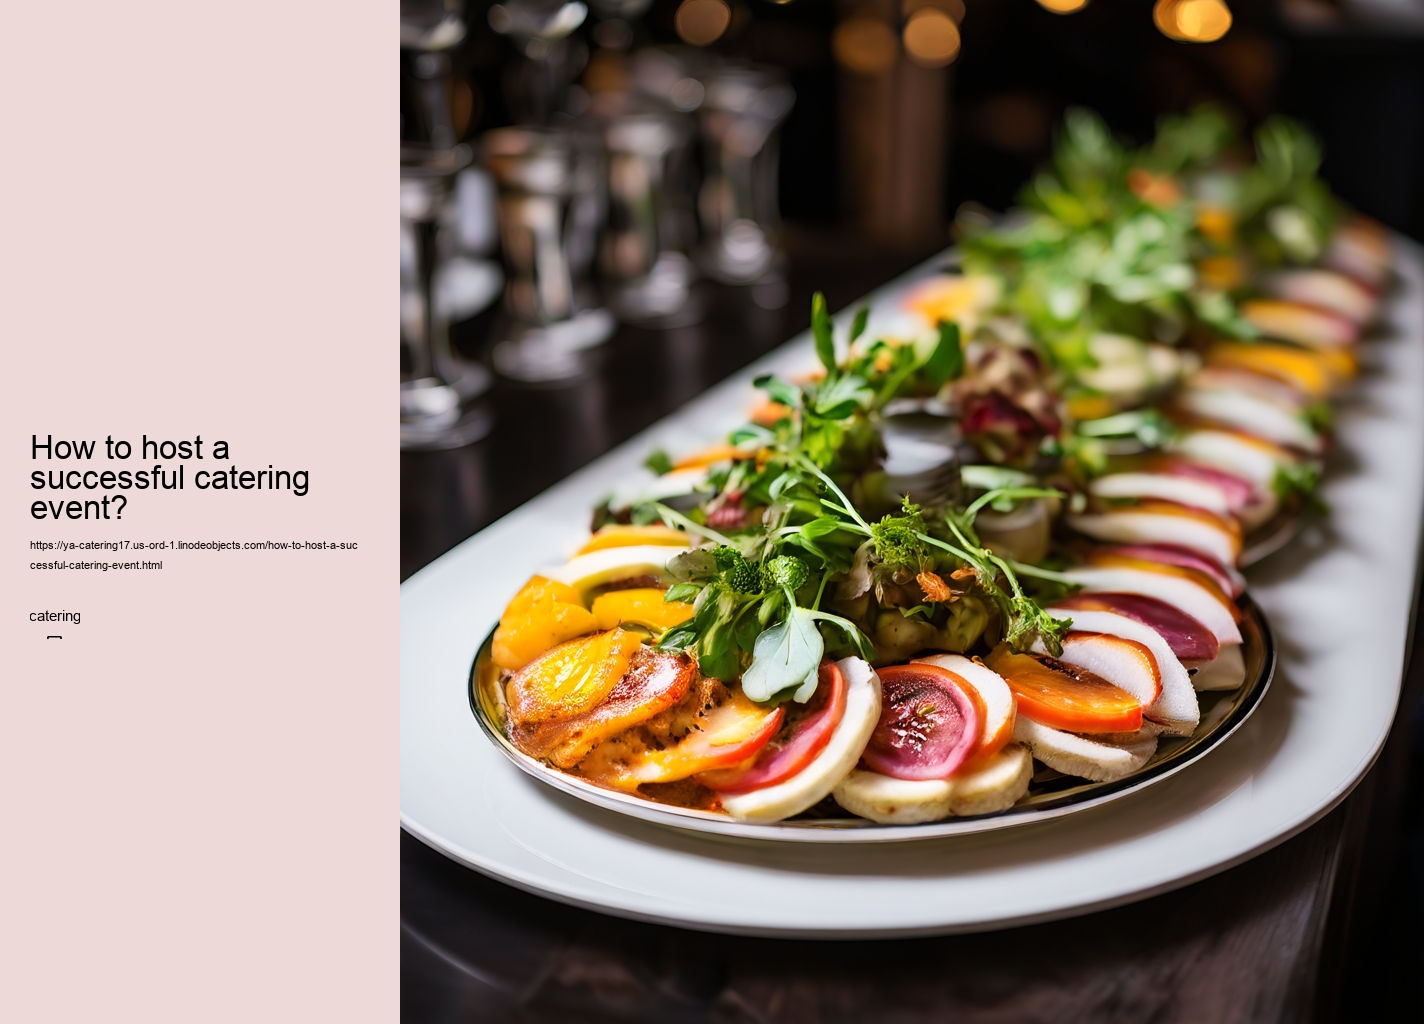 How to host a successful catering event?